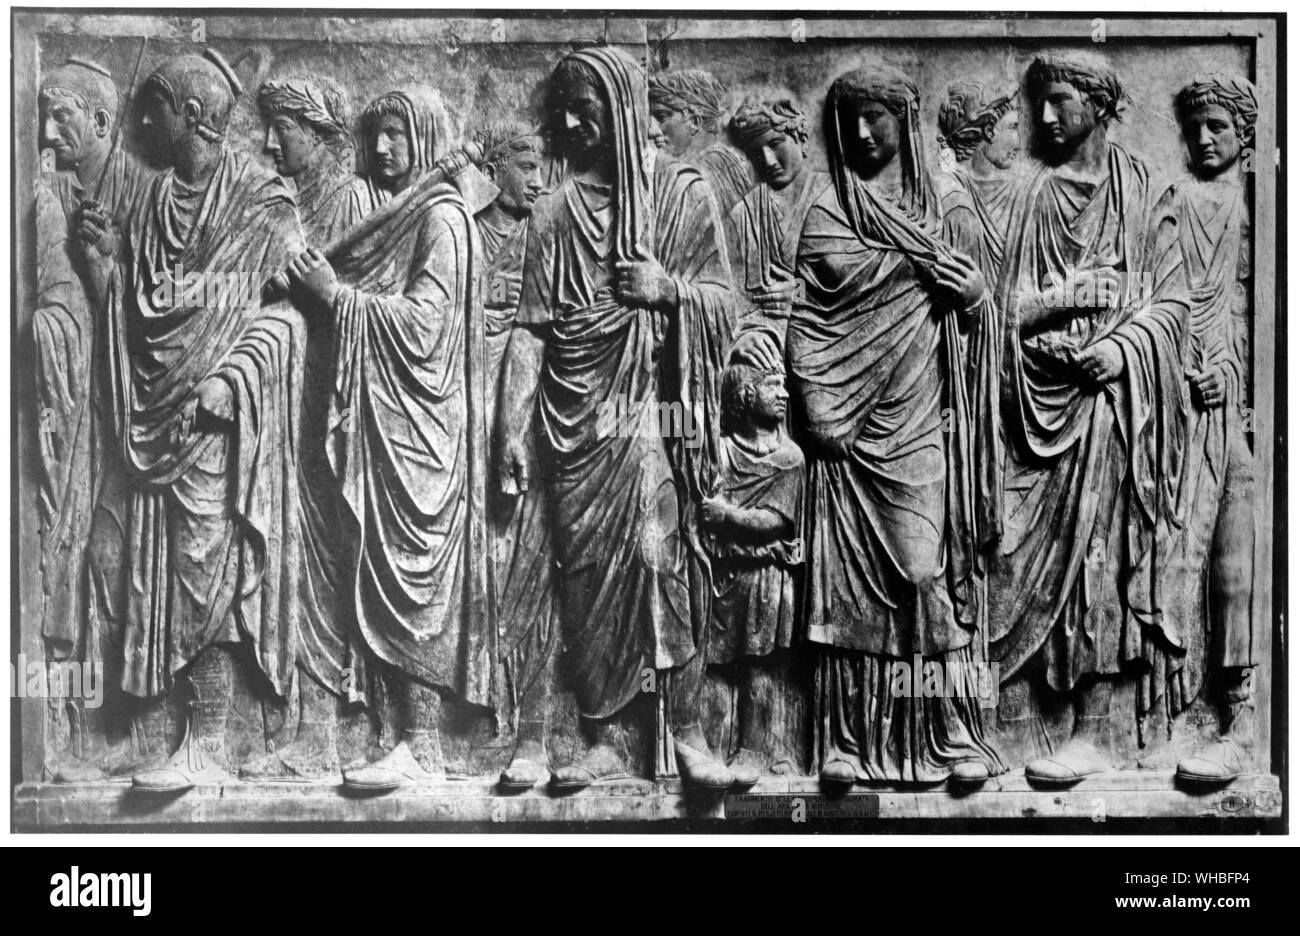 Processional frieze from the altar of the Augustin Peace 13-9 BC - Rome. The Ara Pacis Augustae (Latin, Altar of Majestic Peace. commonly shortened to Ara Pacis) is an altar to Peace, envisioned as a Roman goddess. It was commissioned by the Roman Senate on 4 July 13 BC to honor the triumphal return from Hispania and Gaul of the Roman emperor Augustus, and was consecrated on 30 January 9 BC by the Senate to celebrate the peace established in the Empire after Augustus's victories The altar was meant to be a vision of the Roman civil religion. It sought to portray the peace and fertile Stock Photo